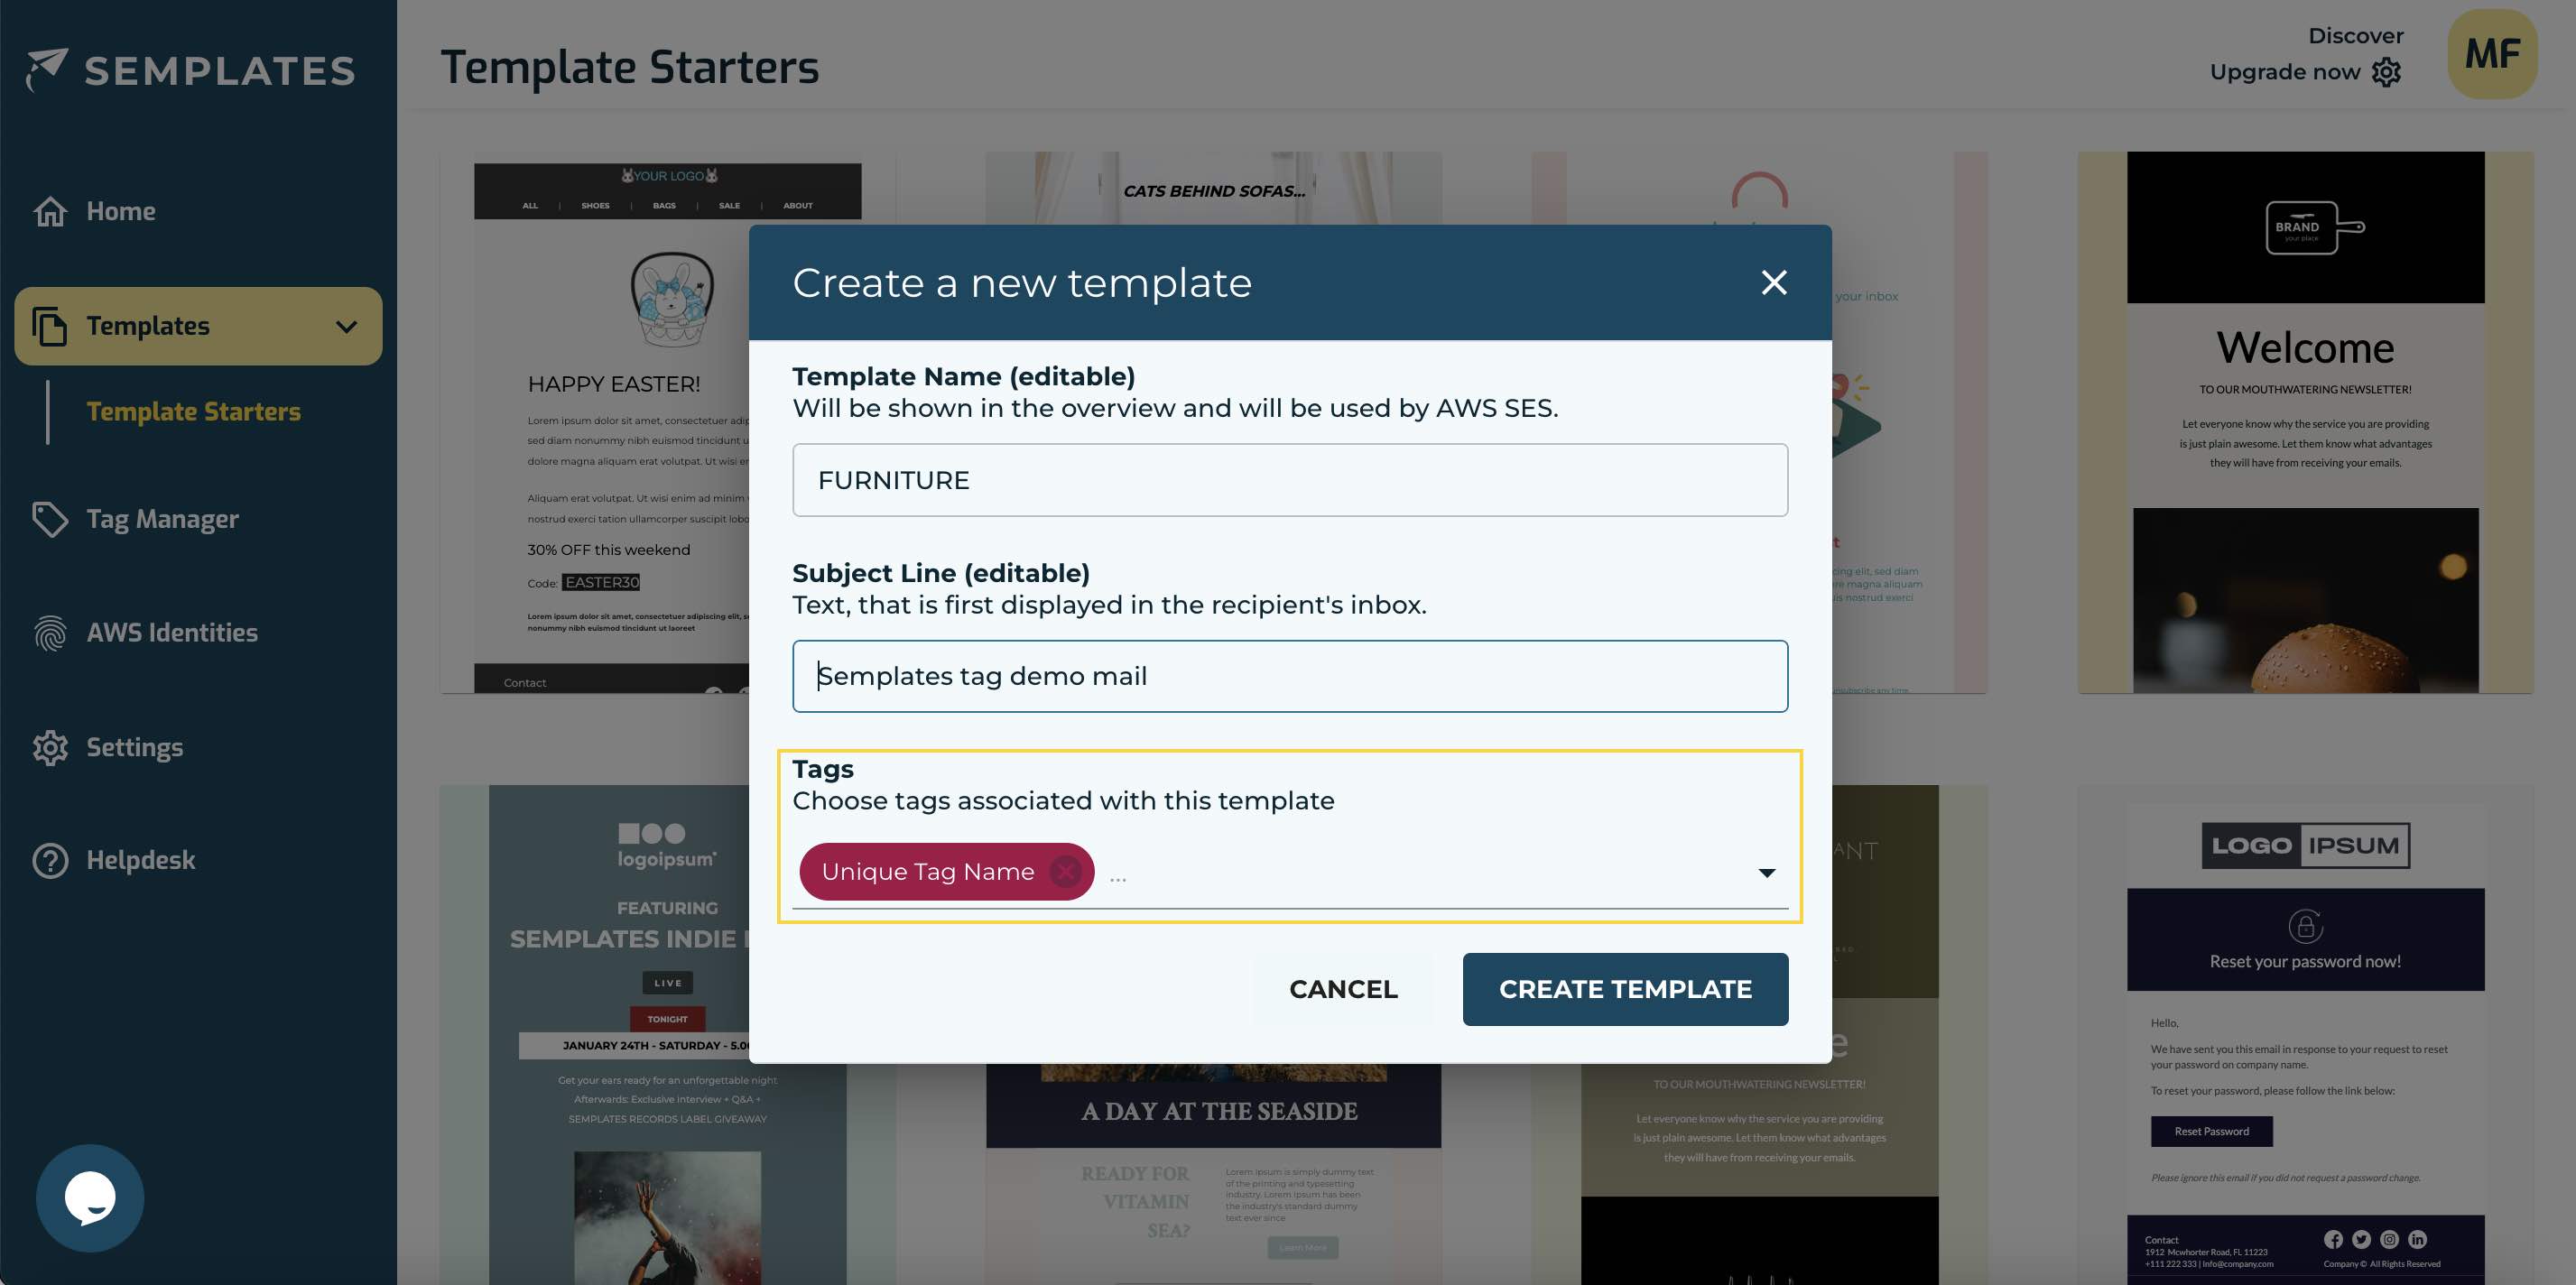 Screenshot of the template starters showing the create template dialog